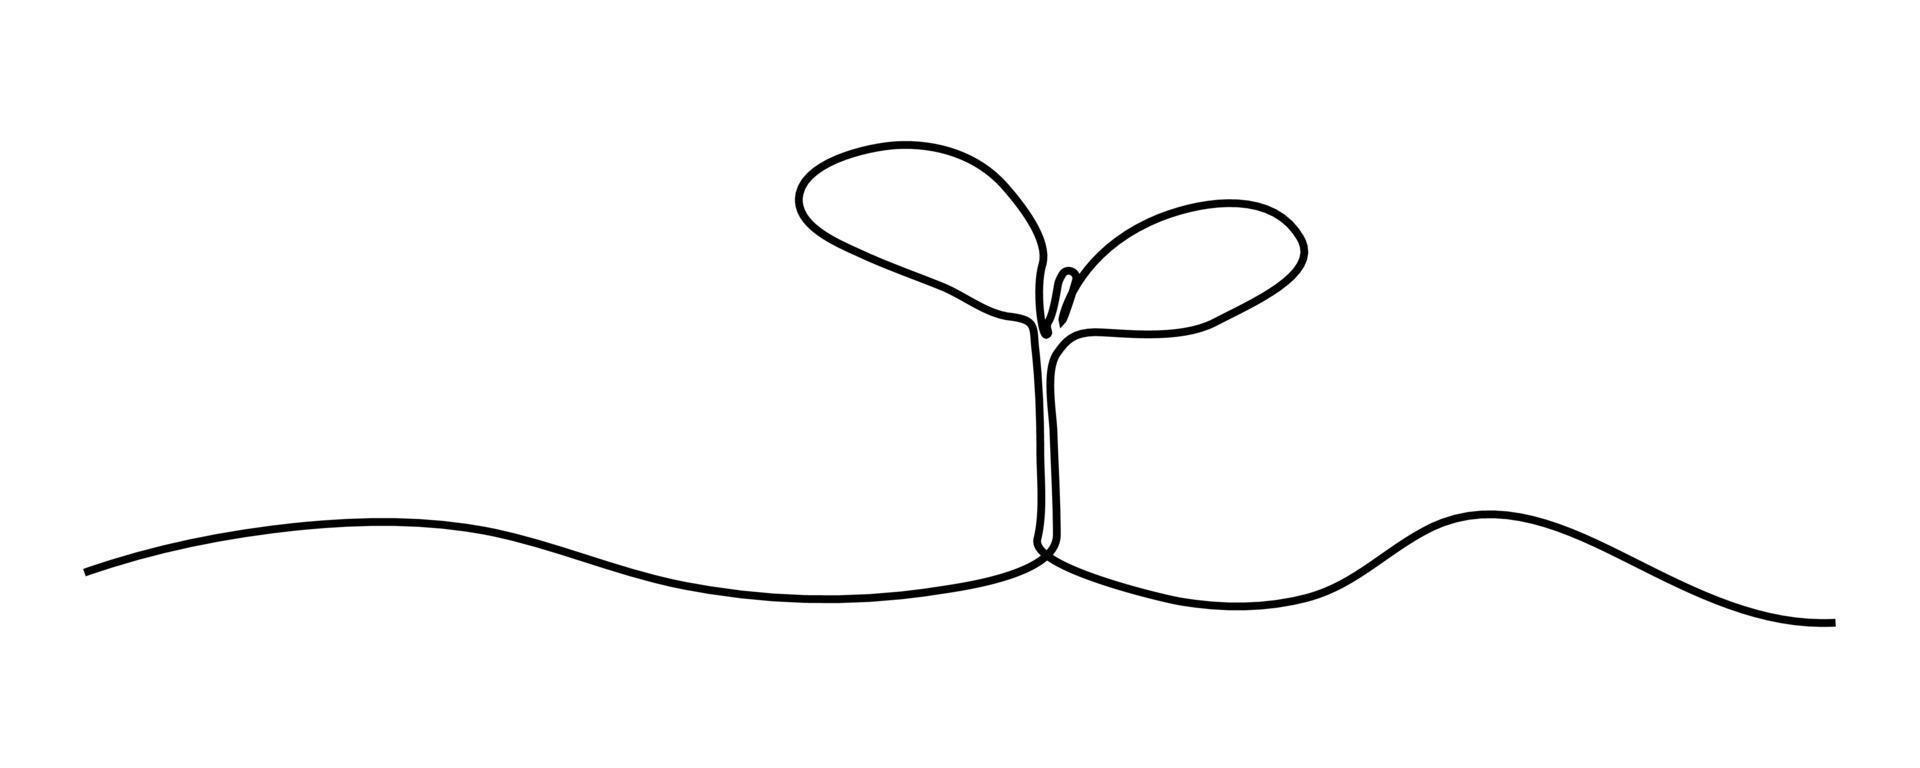 continuous line sapling growing in the garden vector